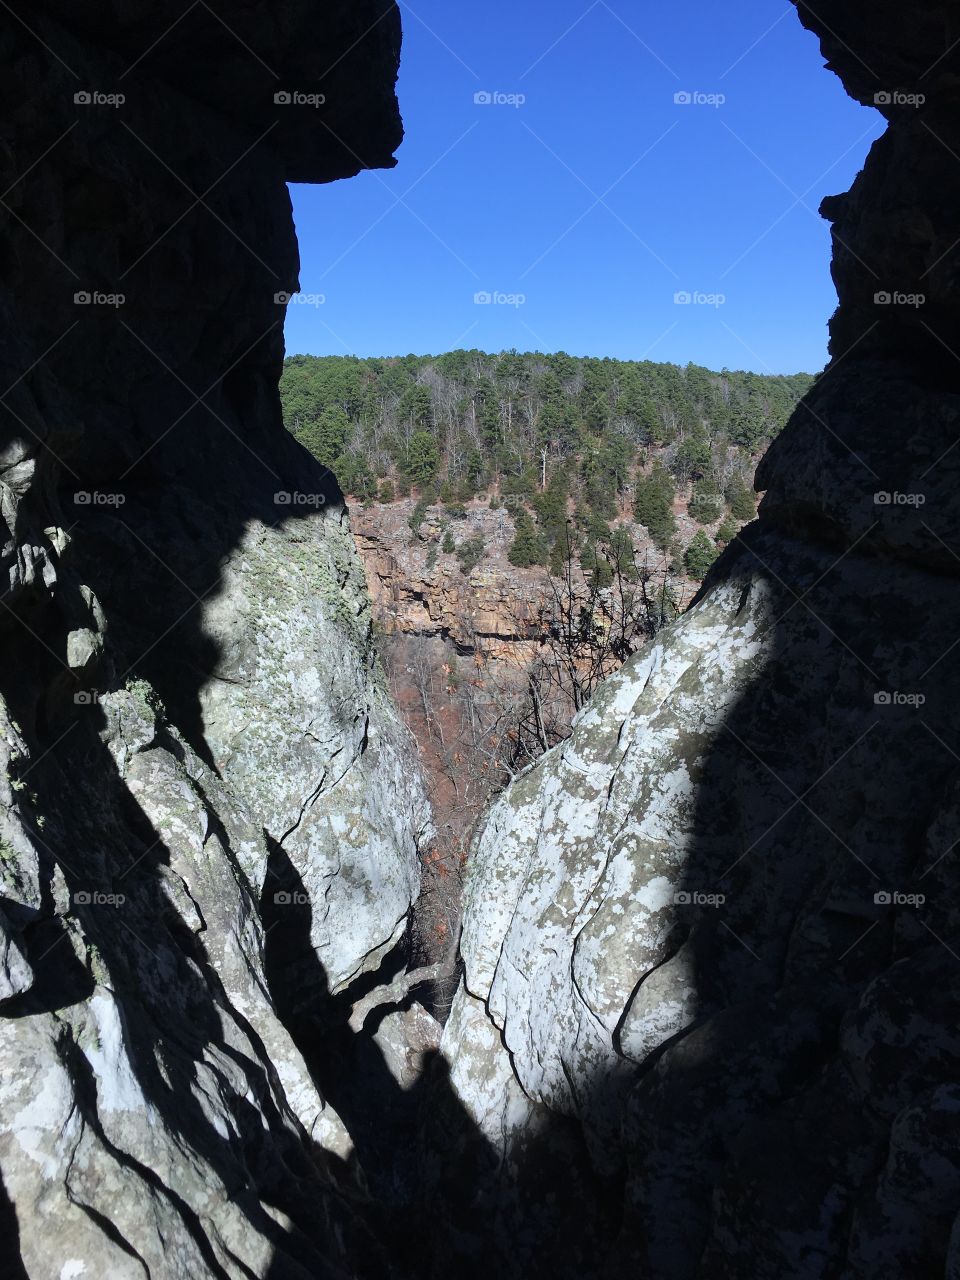 Looking down through the rocks